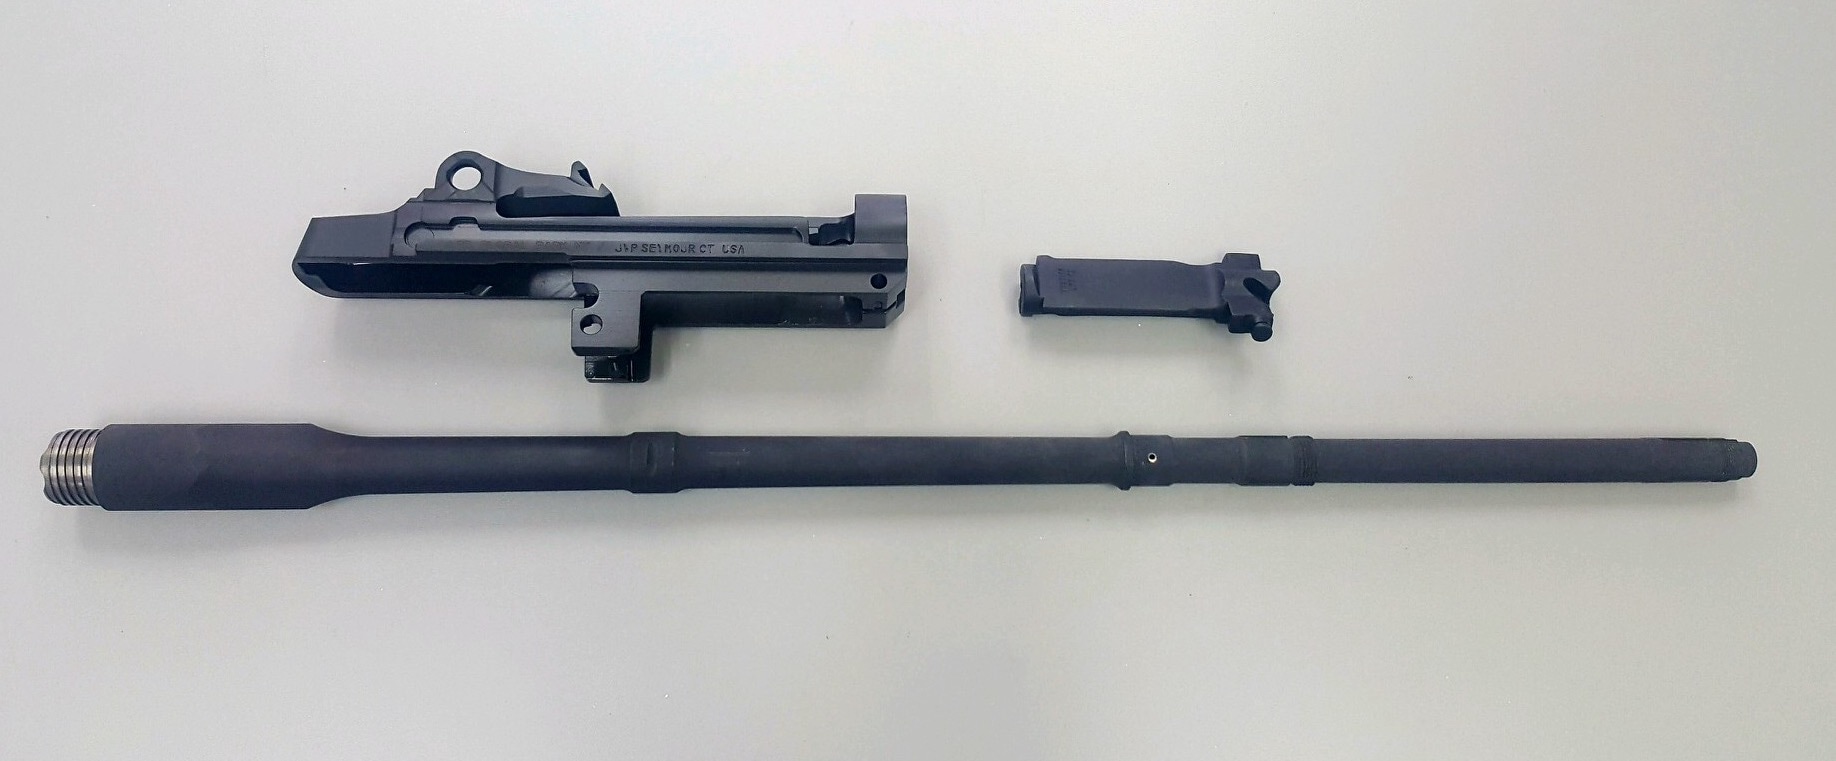 m1a bolt exploded view